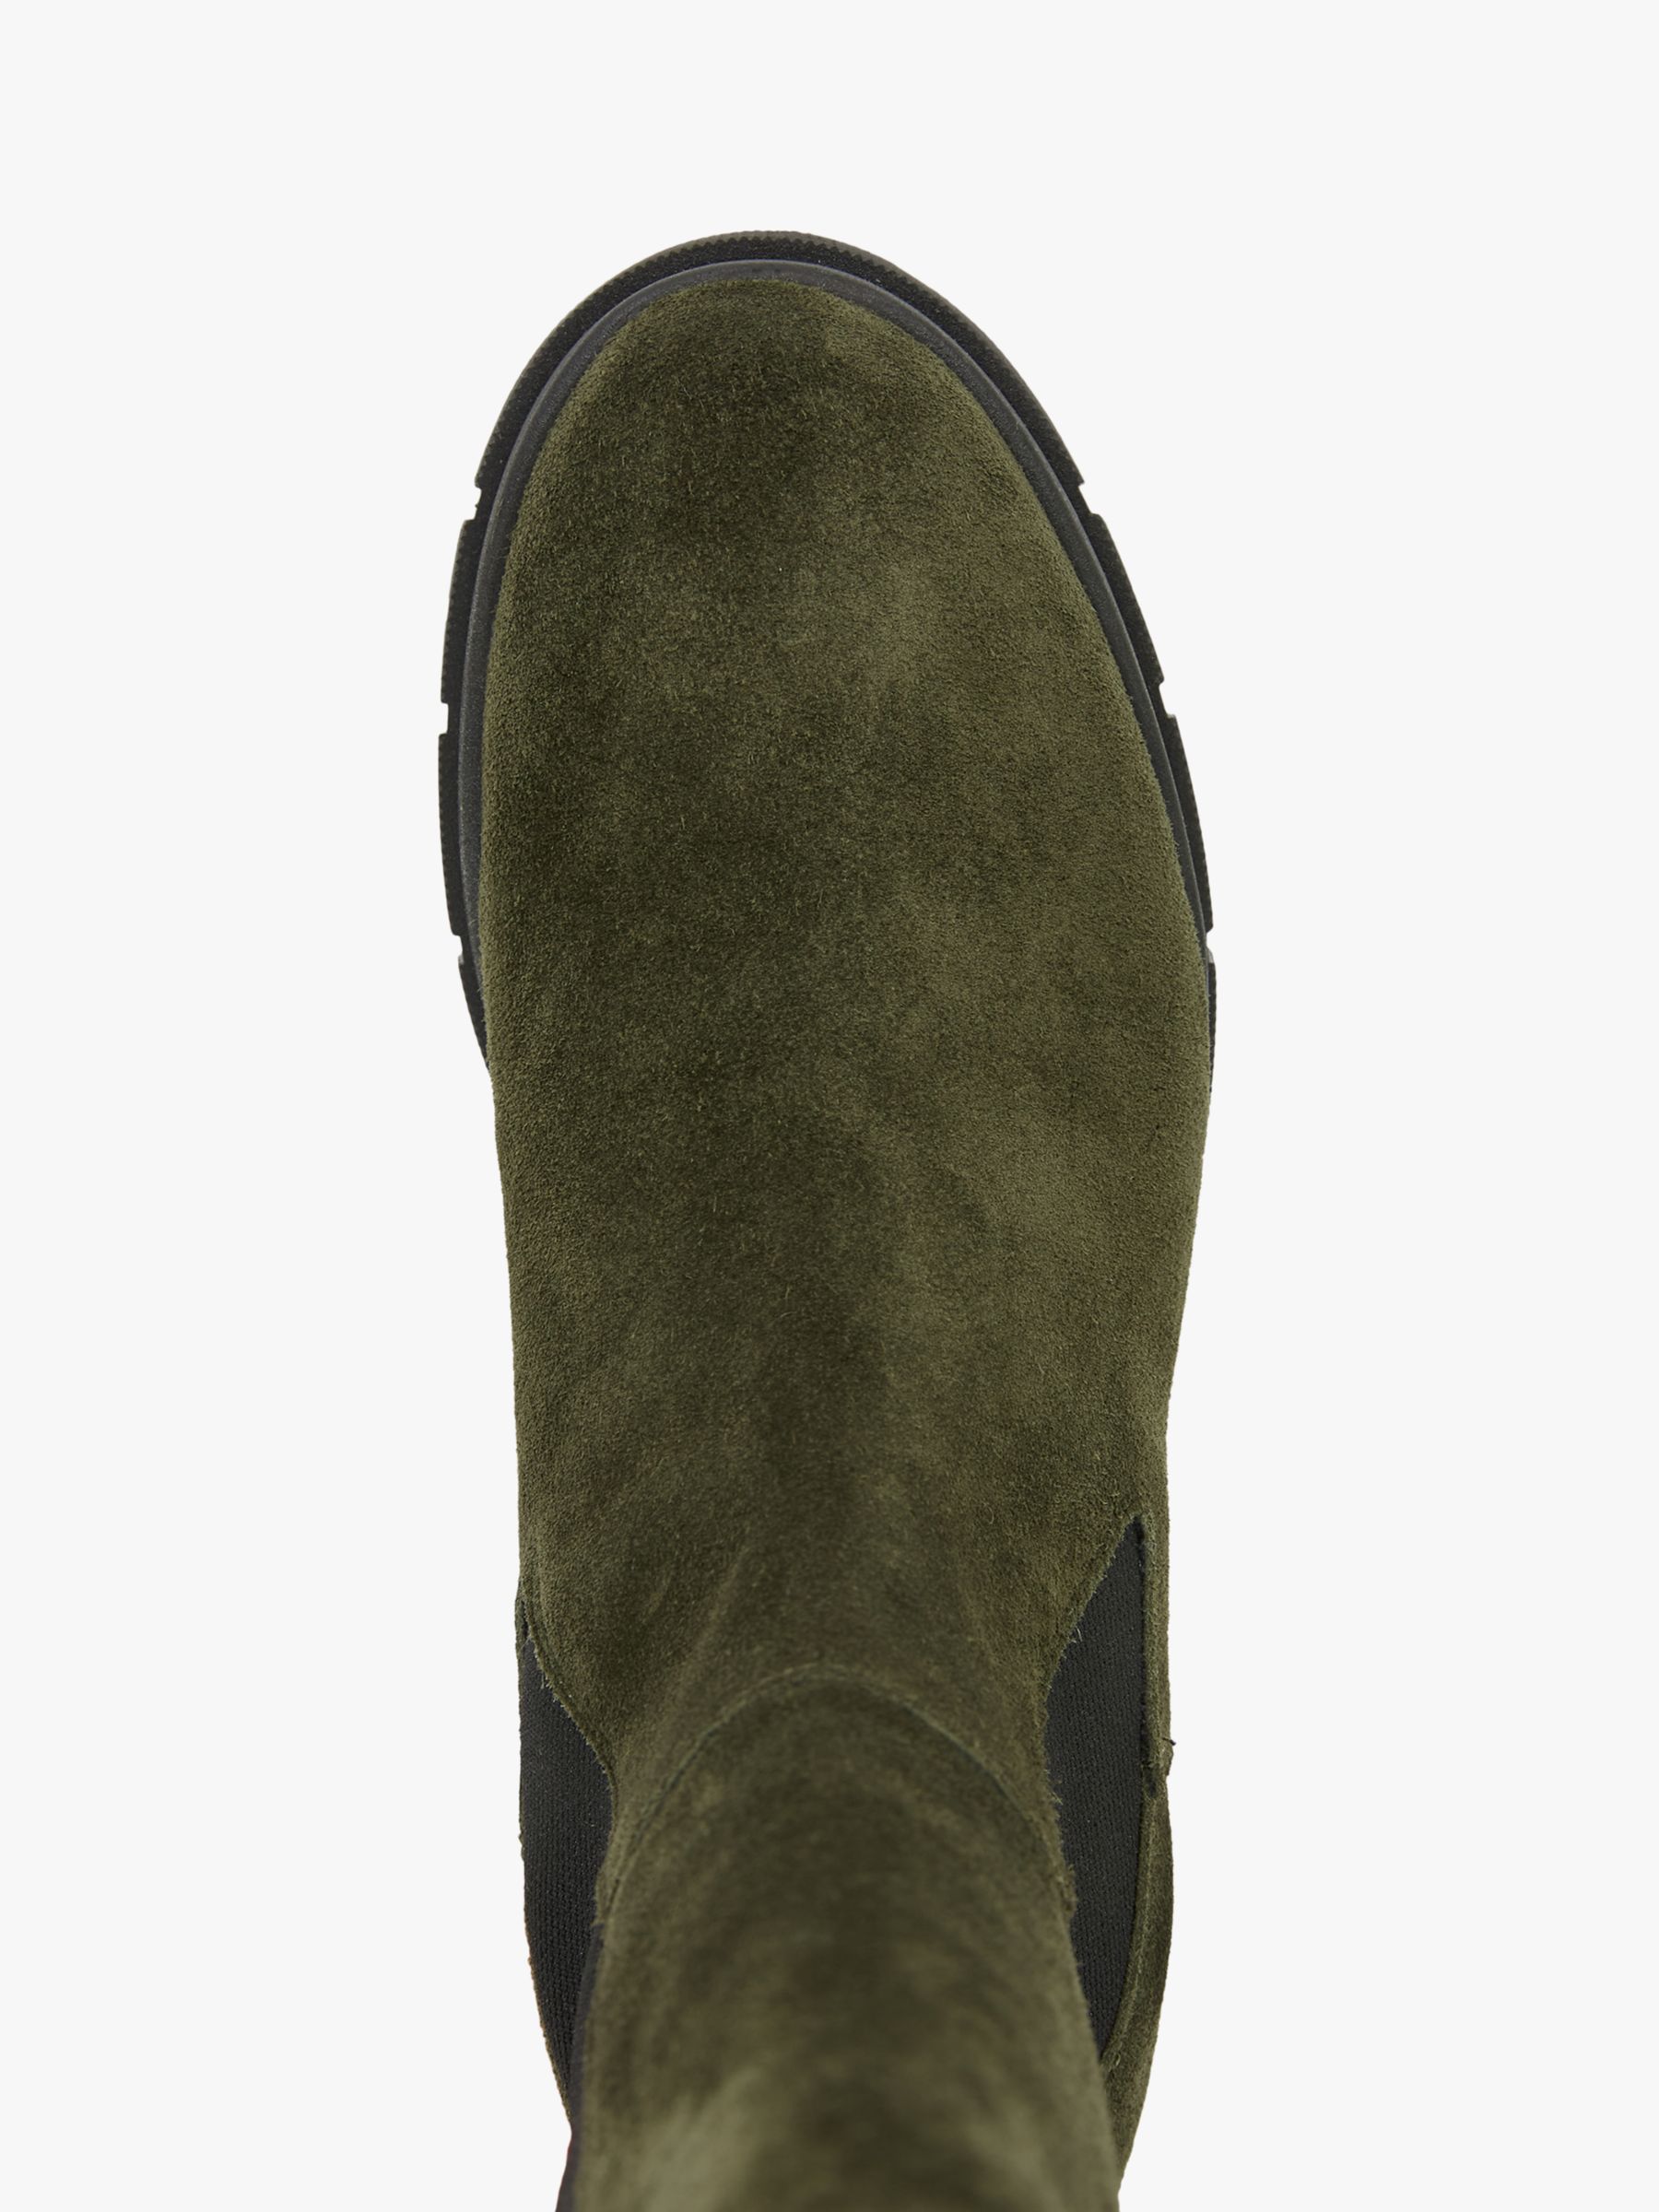 Celtic & Co. Chunky Tall Suede Chelsea Boot, Olive, 3